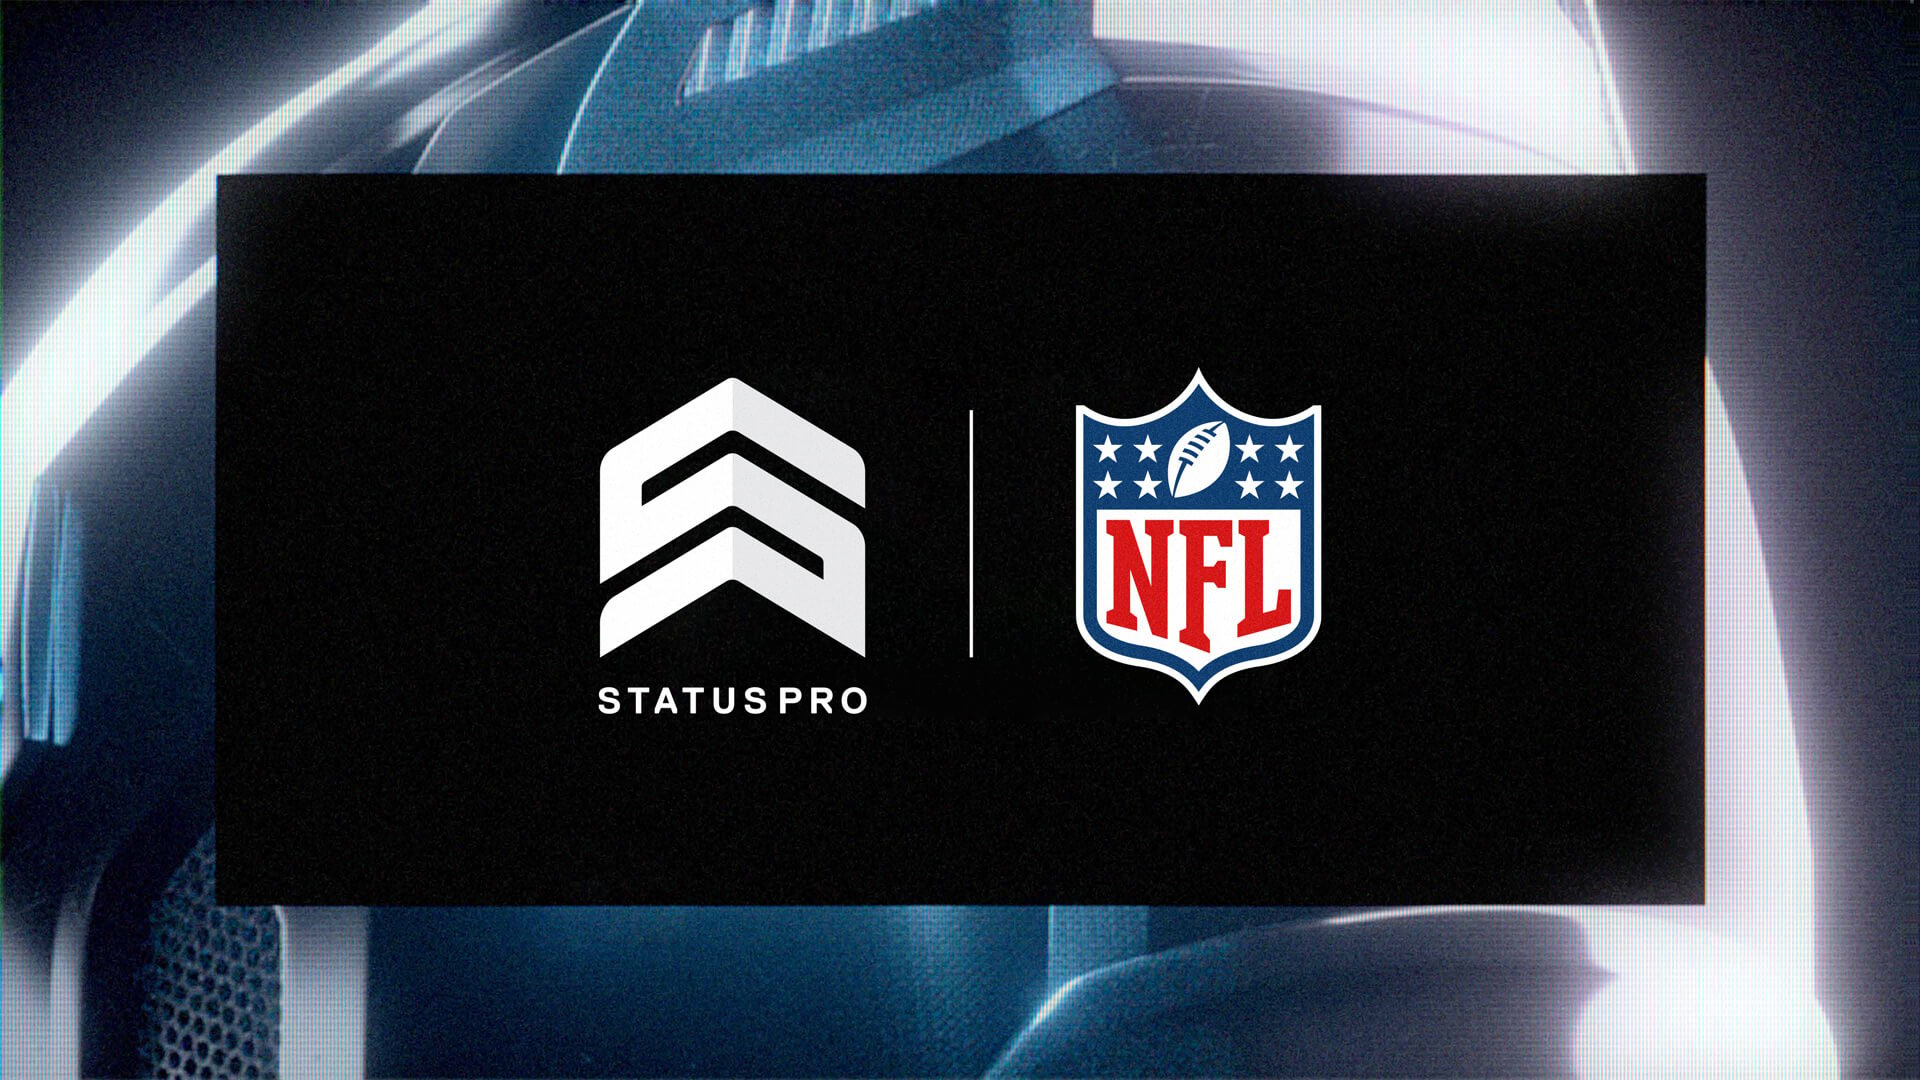 The StatusPRO and NFL logos side by side for the new NFL VR game